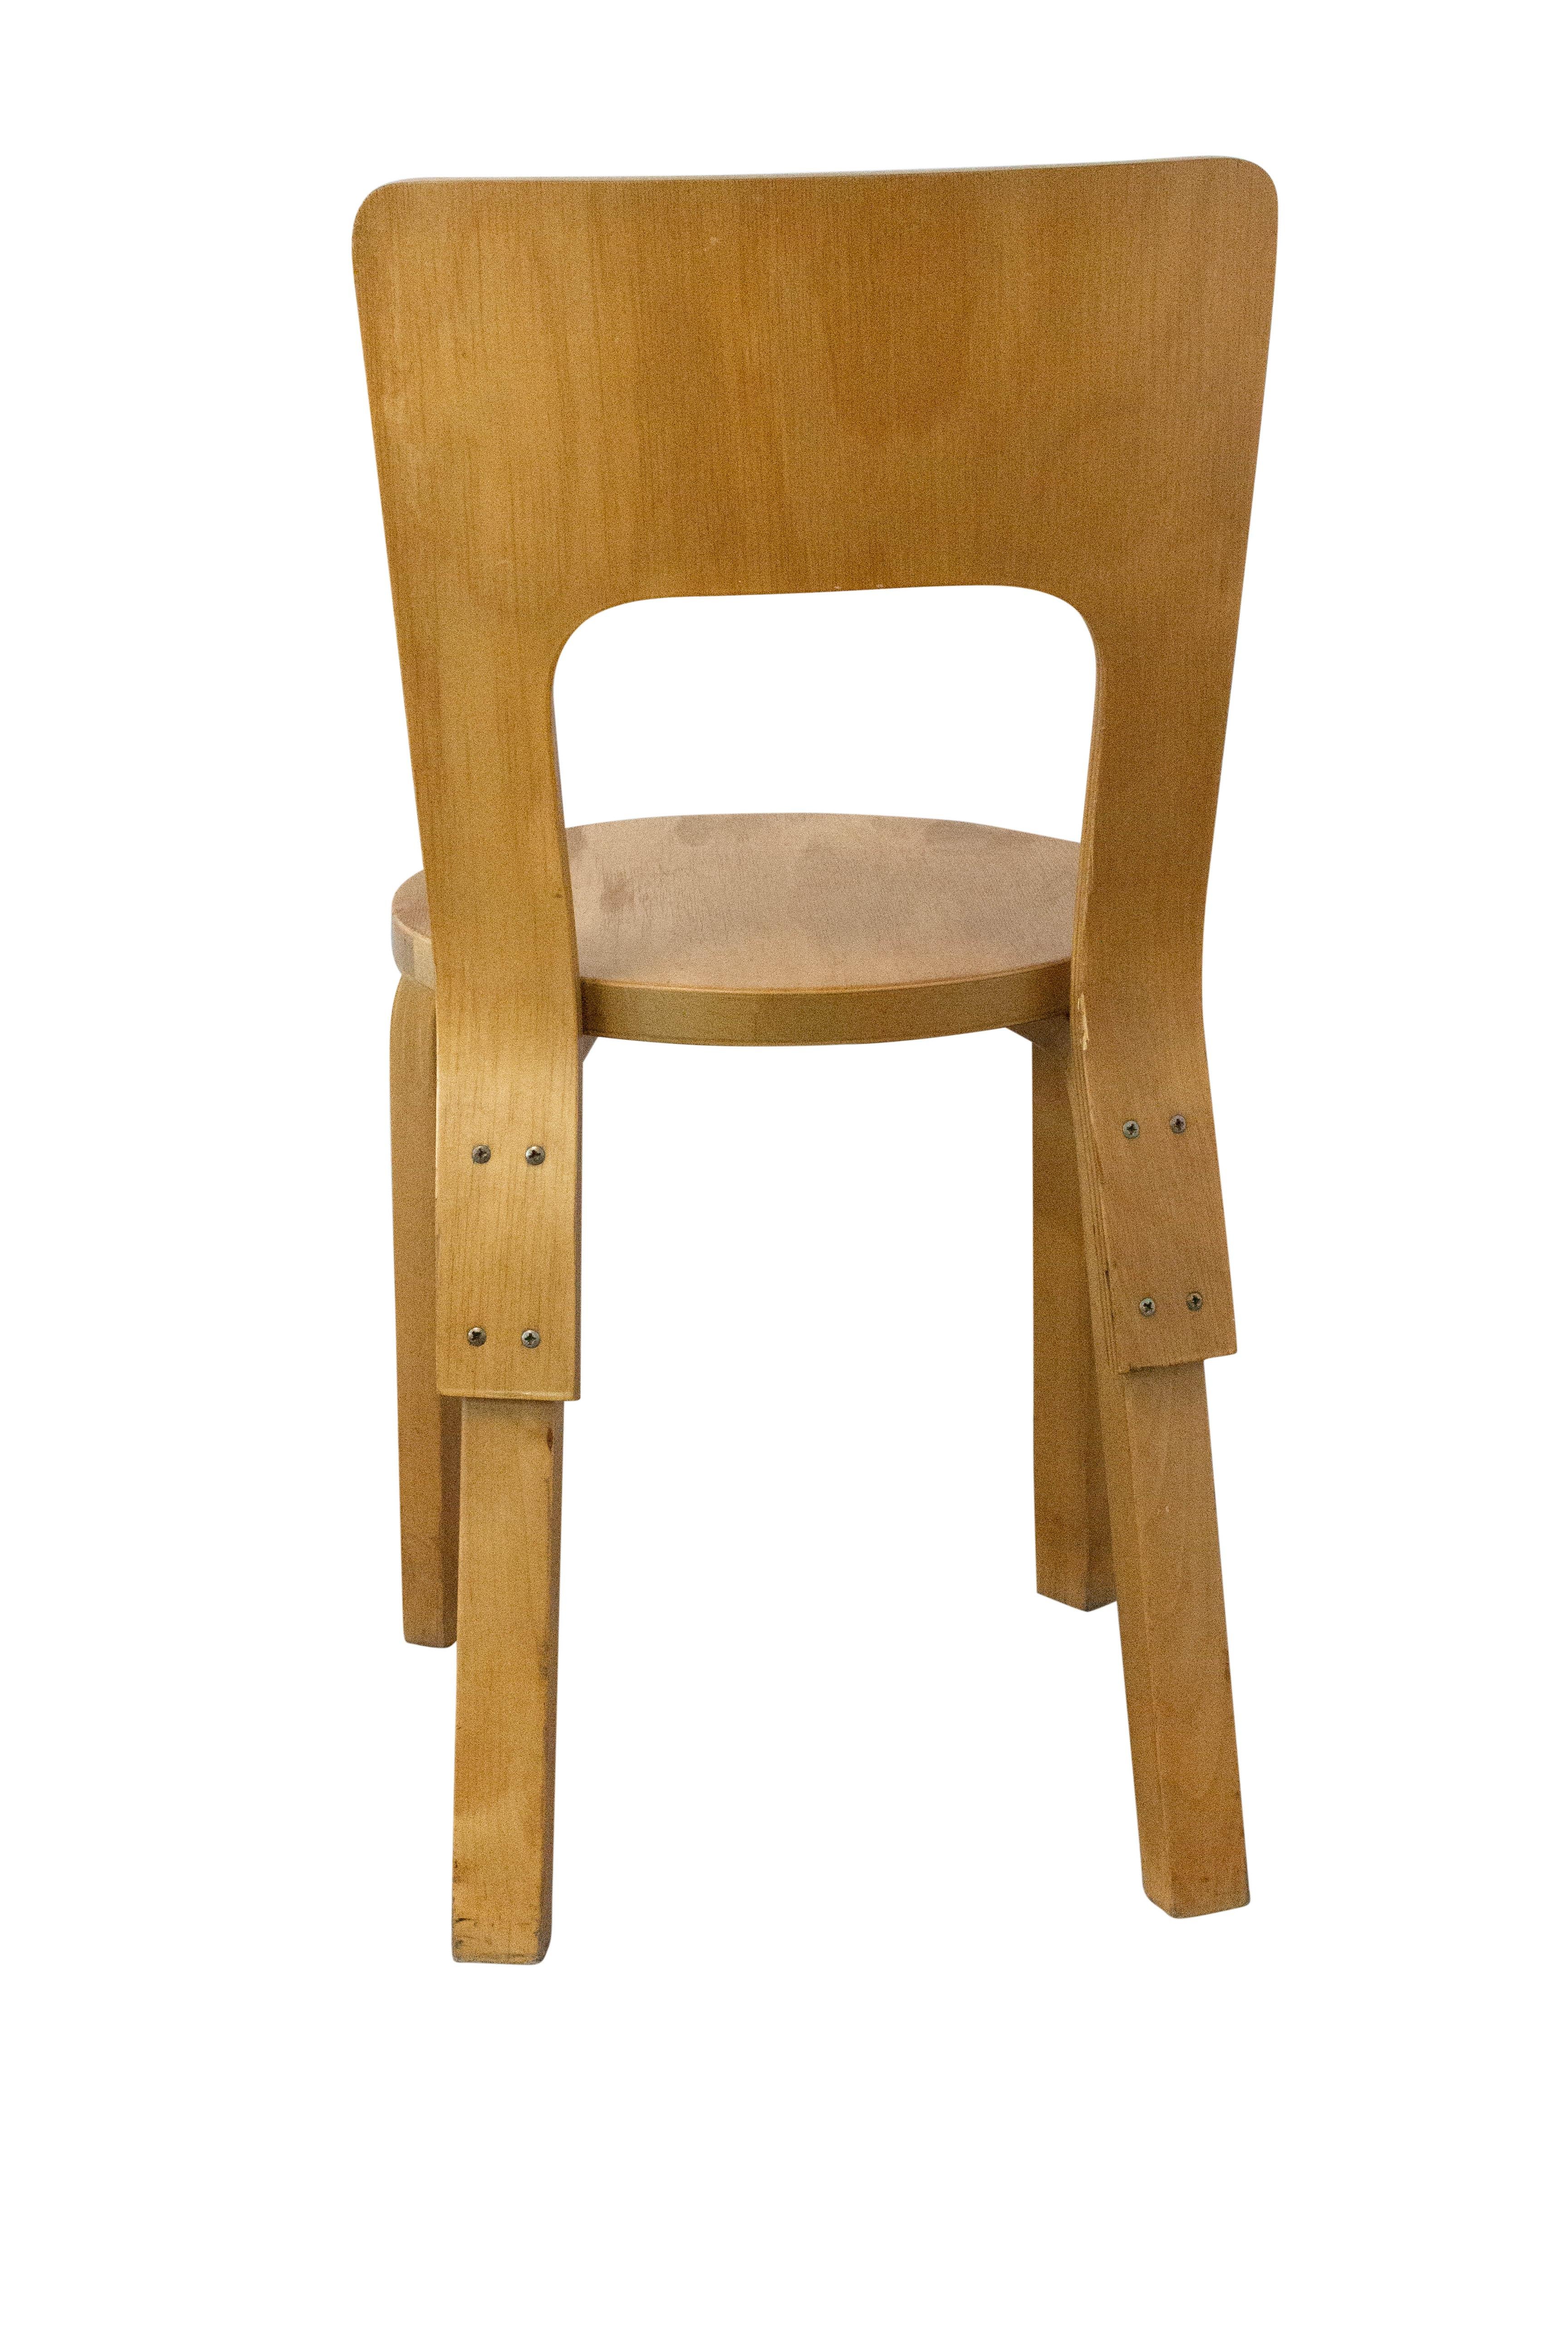 Finnish Vintage Wood Chair Alvar Aalto Model 66, circa 1930 In Good Condition For Sale In Labrit, Landes